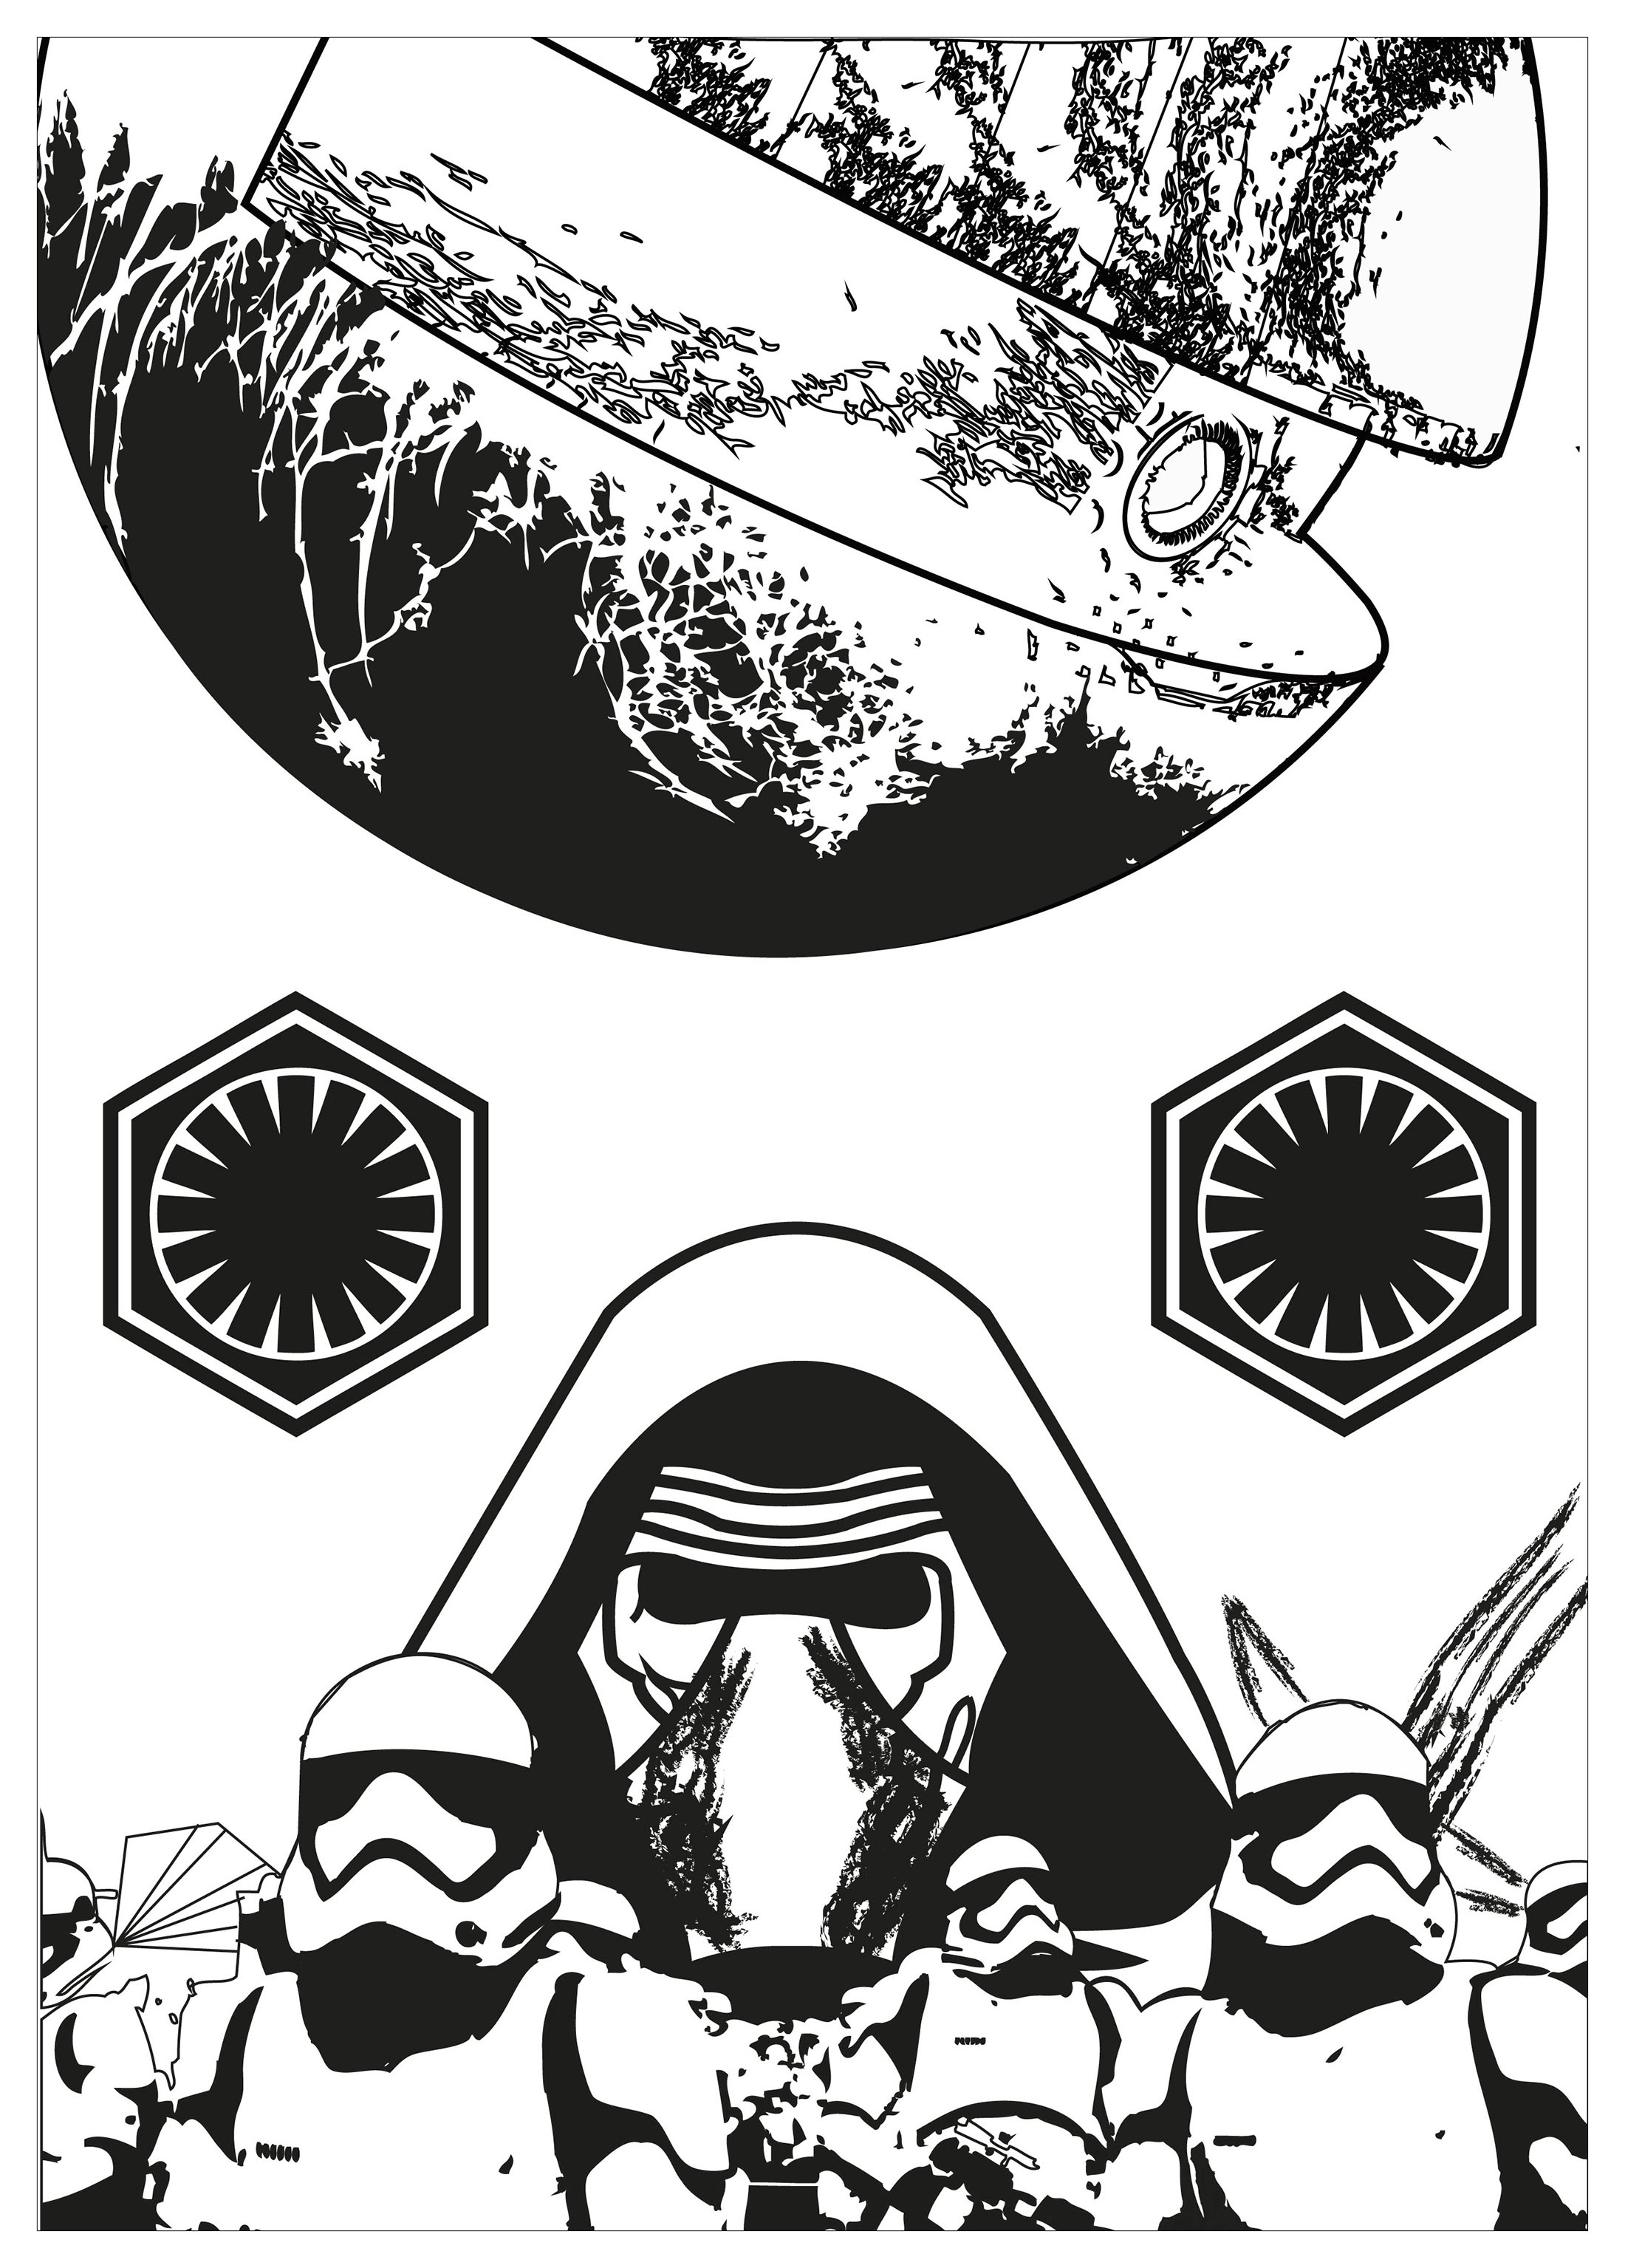 A coloring page inspired by Star Wars, featuring the Black Star, Stormtroopers and the evil Kylo Ren.